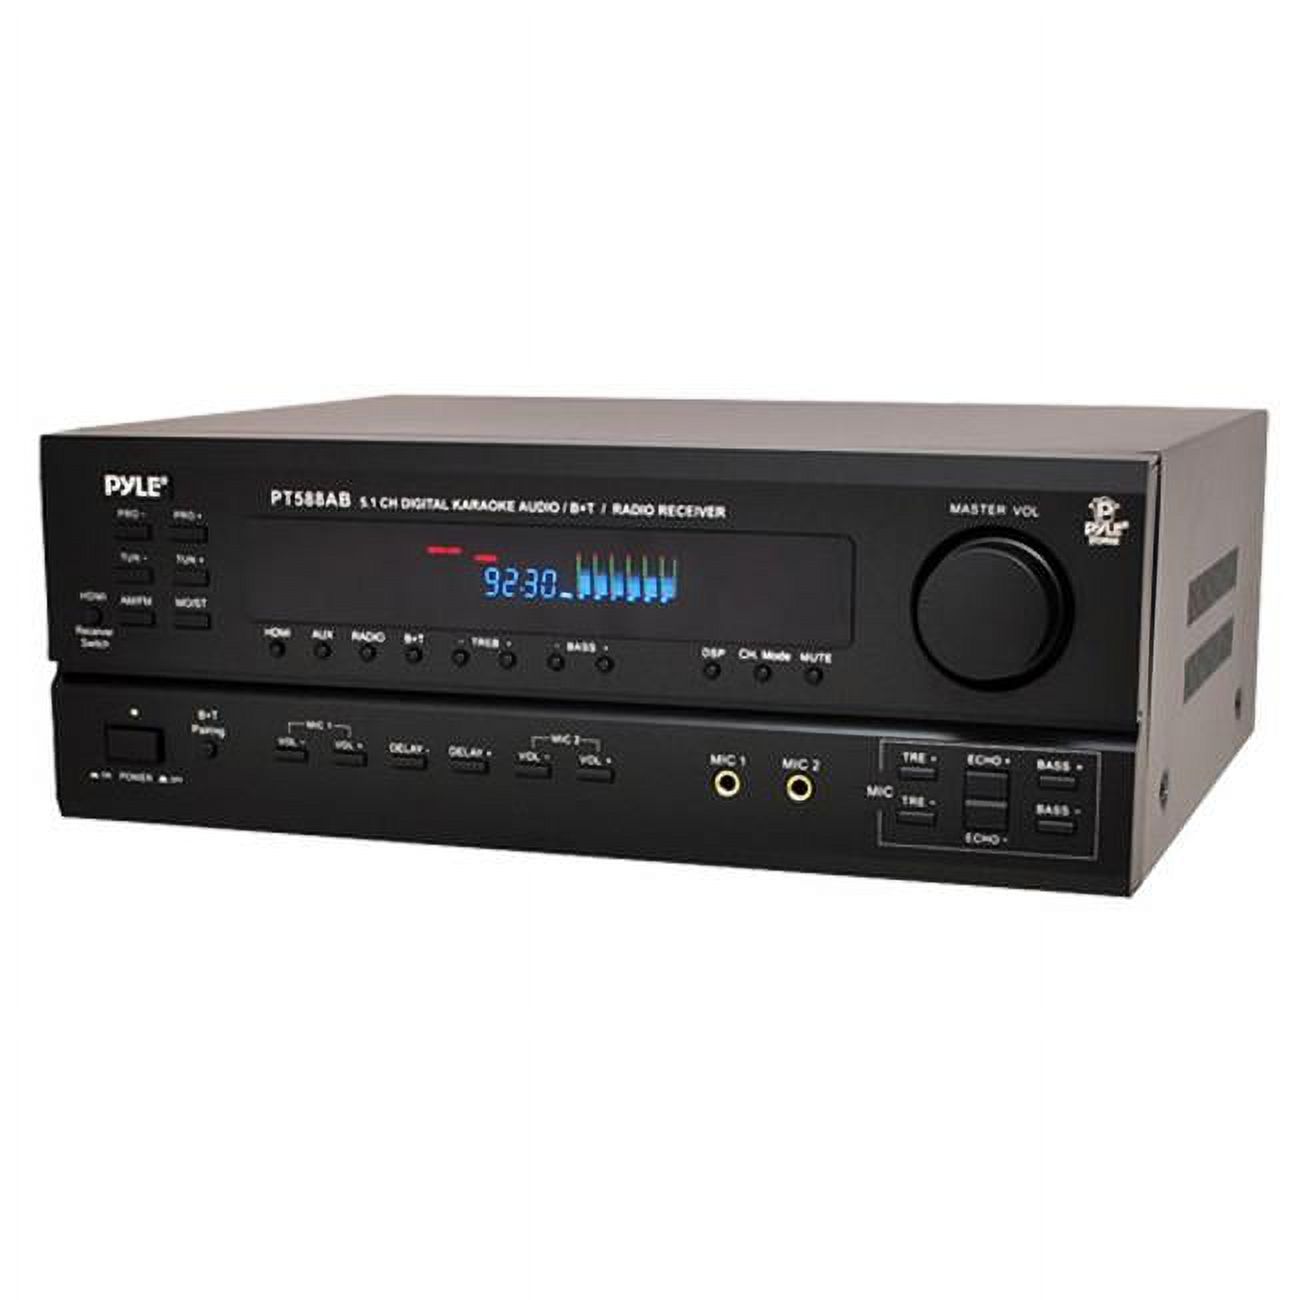 PYLE PT588AB 5.1 Channel 420 Watt Home Audio Receiver Amplifier with Bluetooth - image 1 of 5